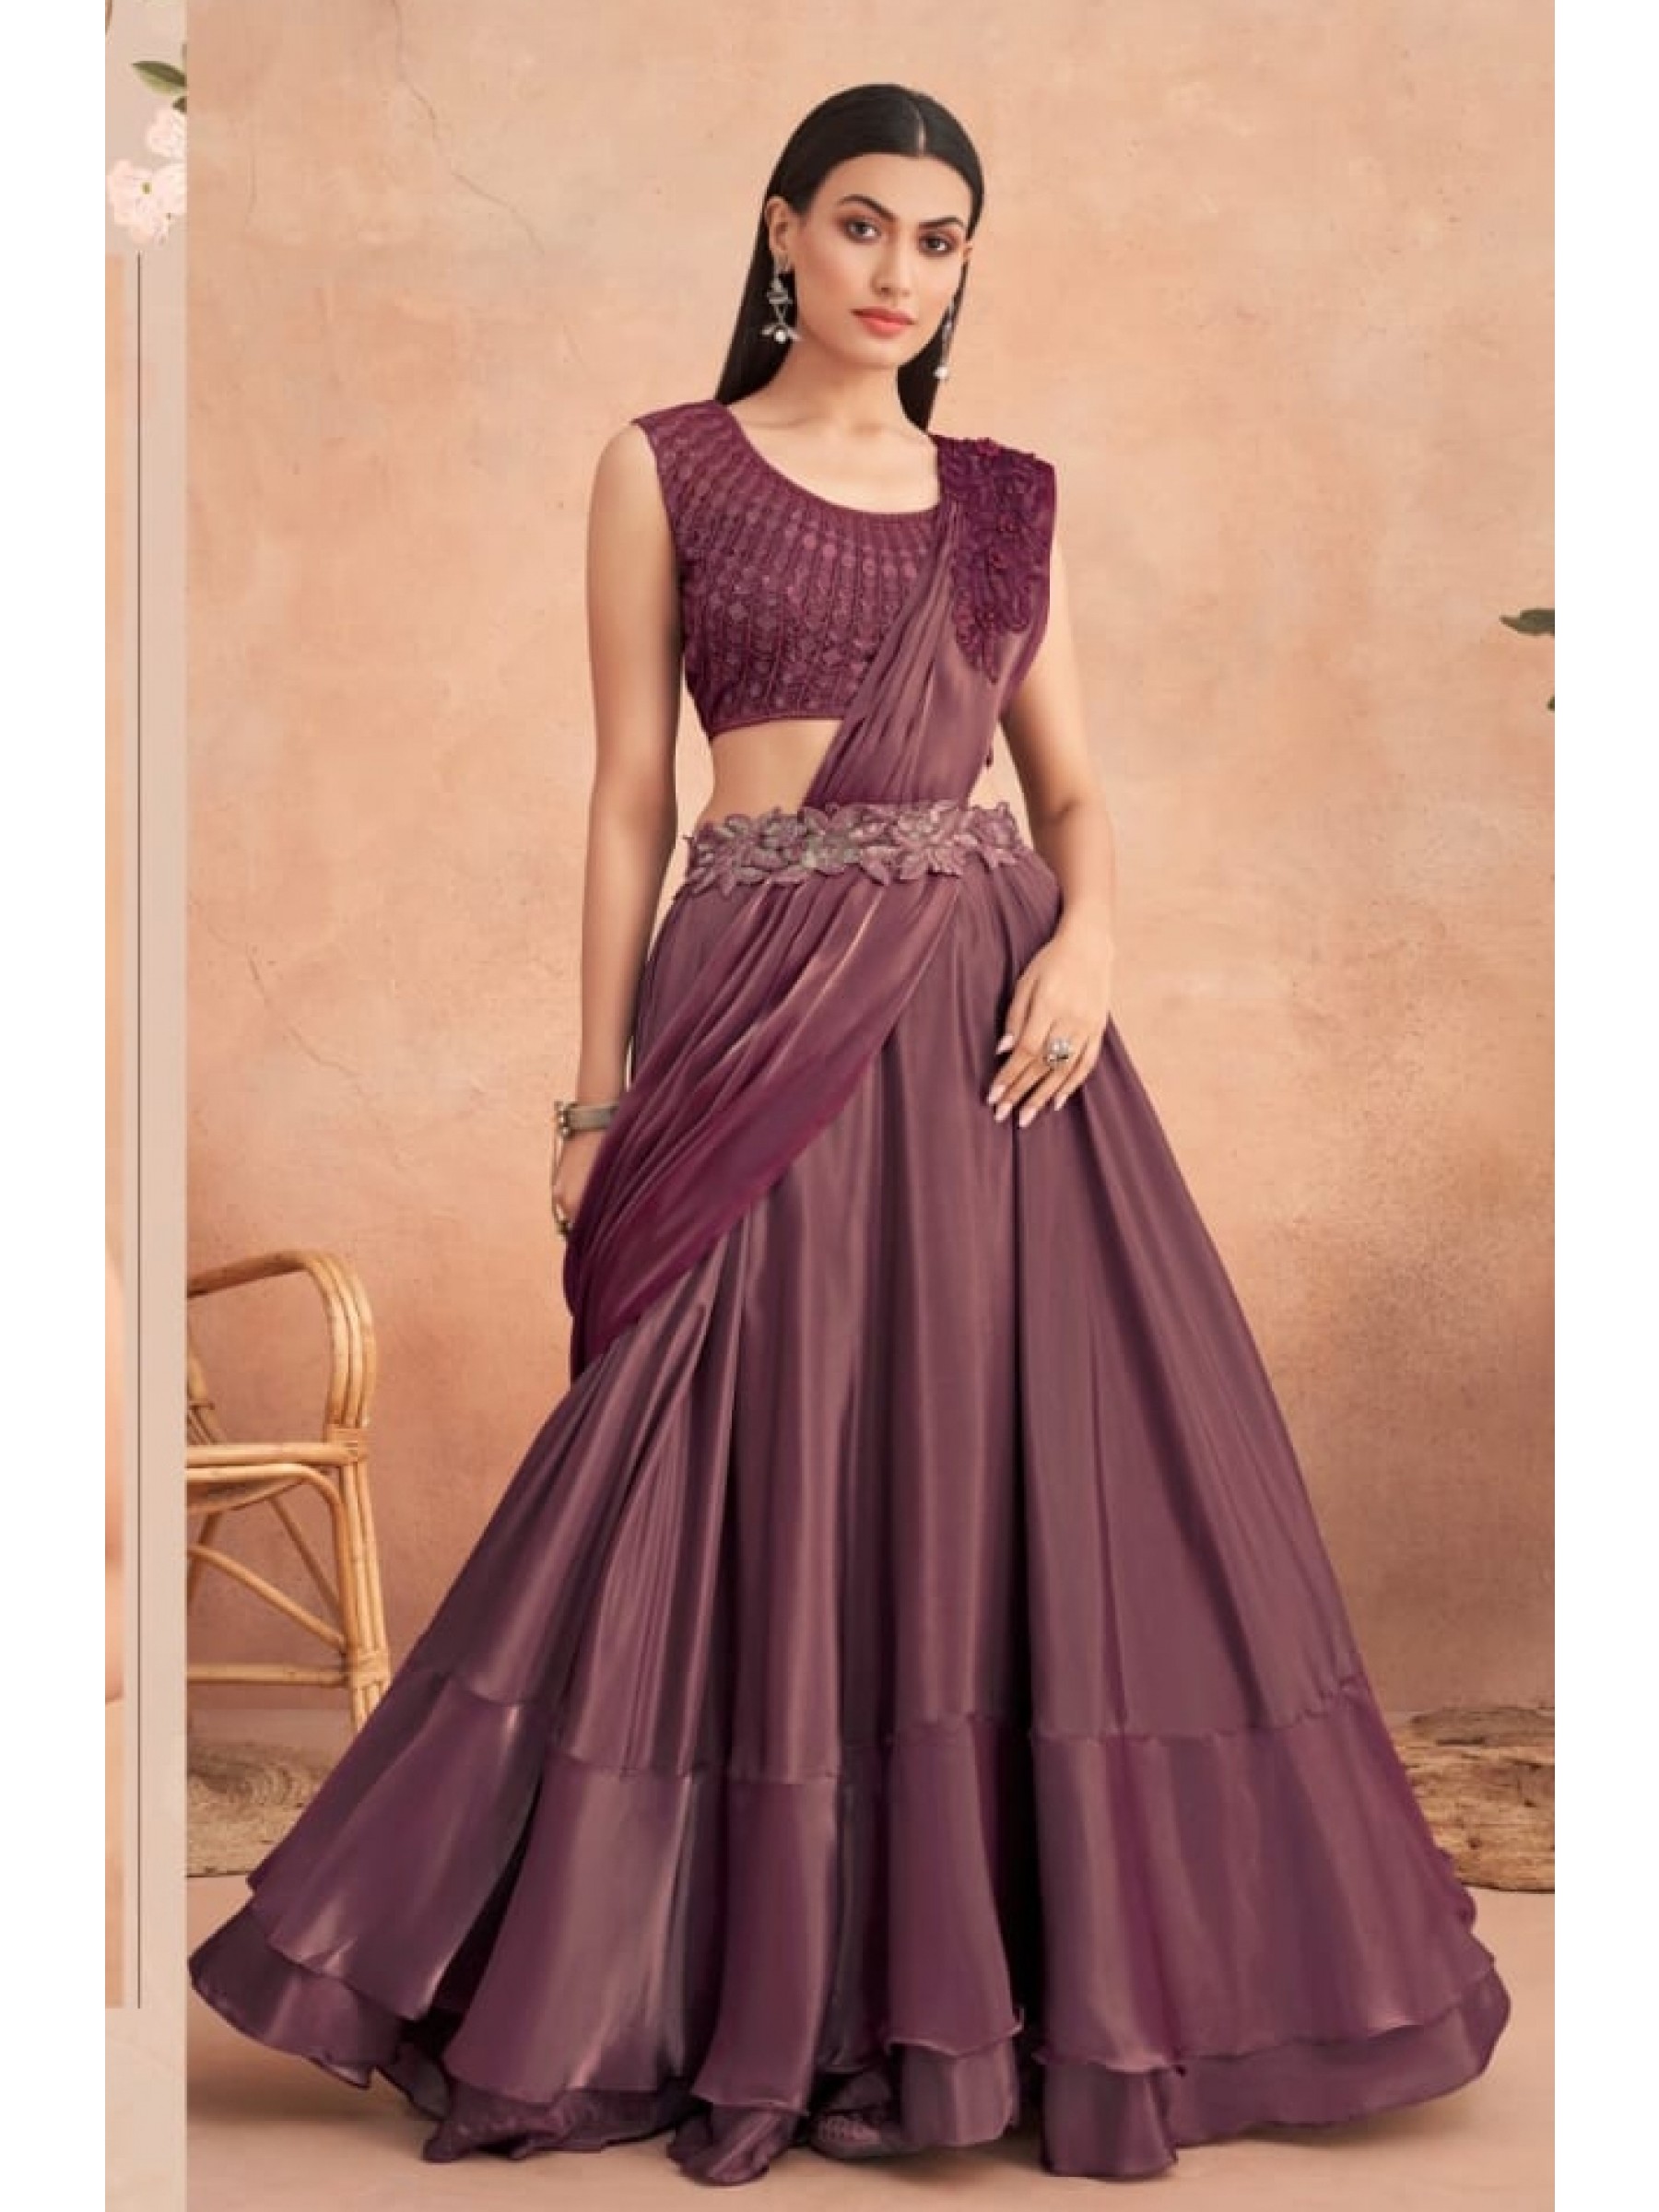 Fancy Silk  Ready To Wear Saree Purple Color With Embroidery Work